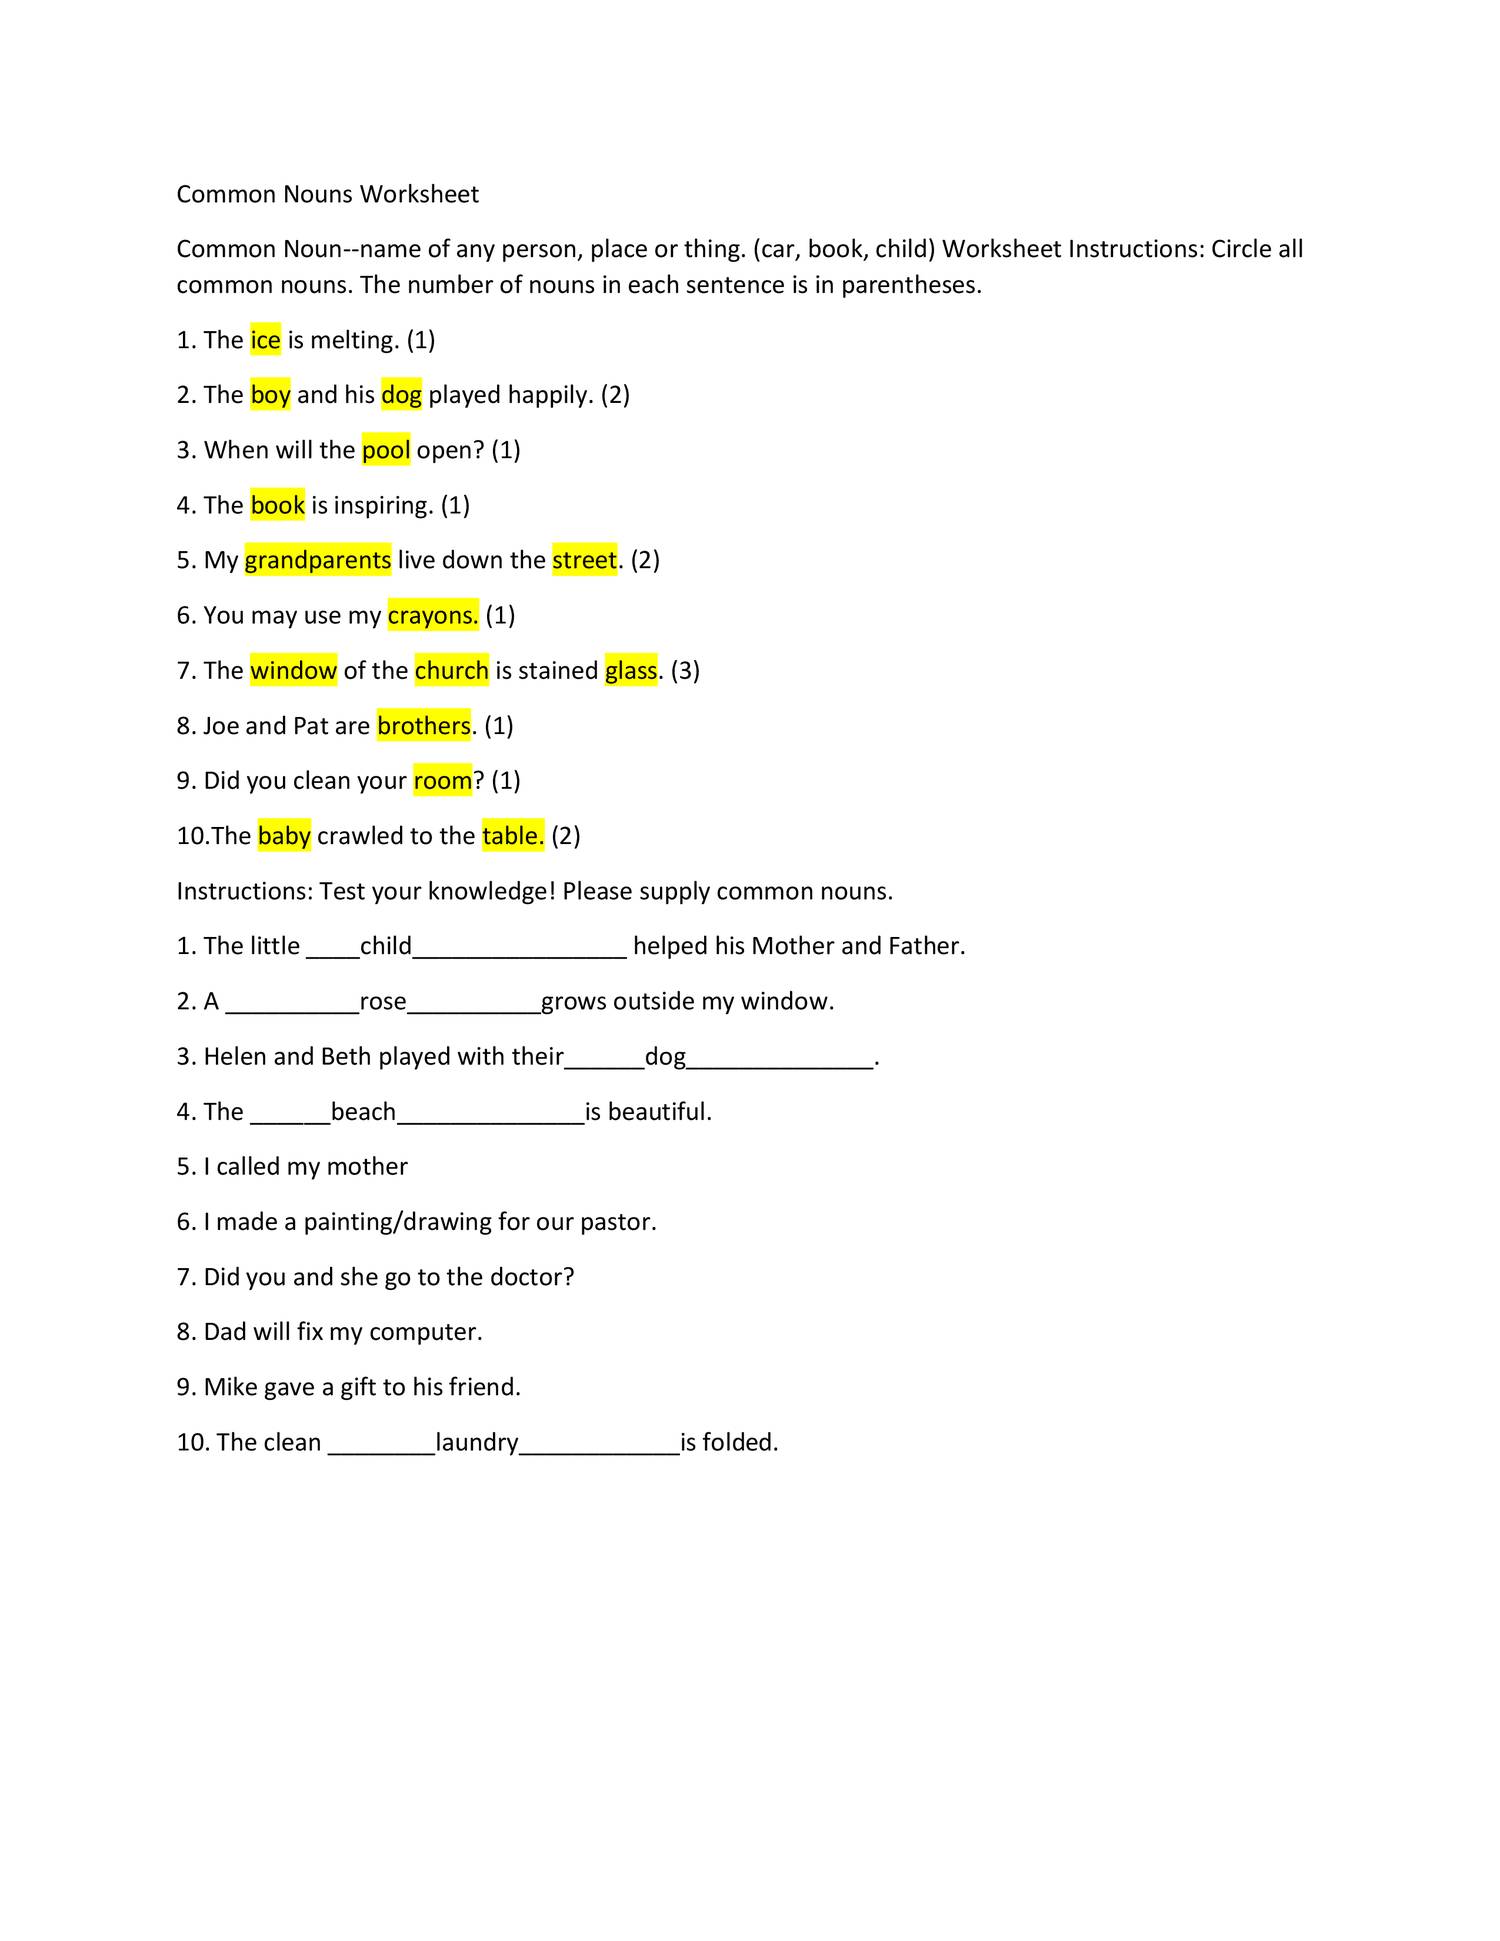 countable-and-uncountable-nouns-worksheet-free-esl-common-noun-and-proper-noun-worksheet-for